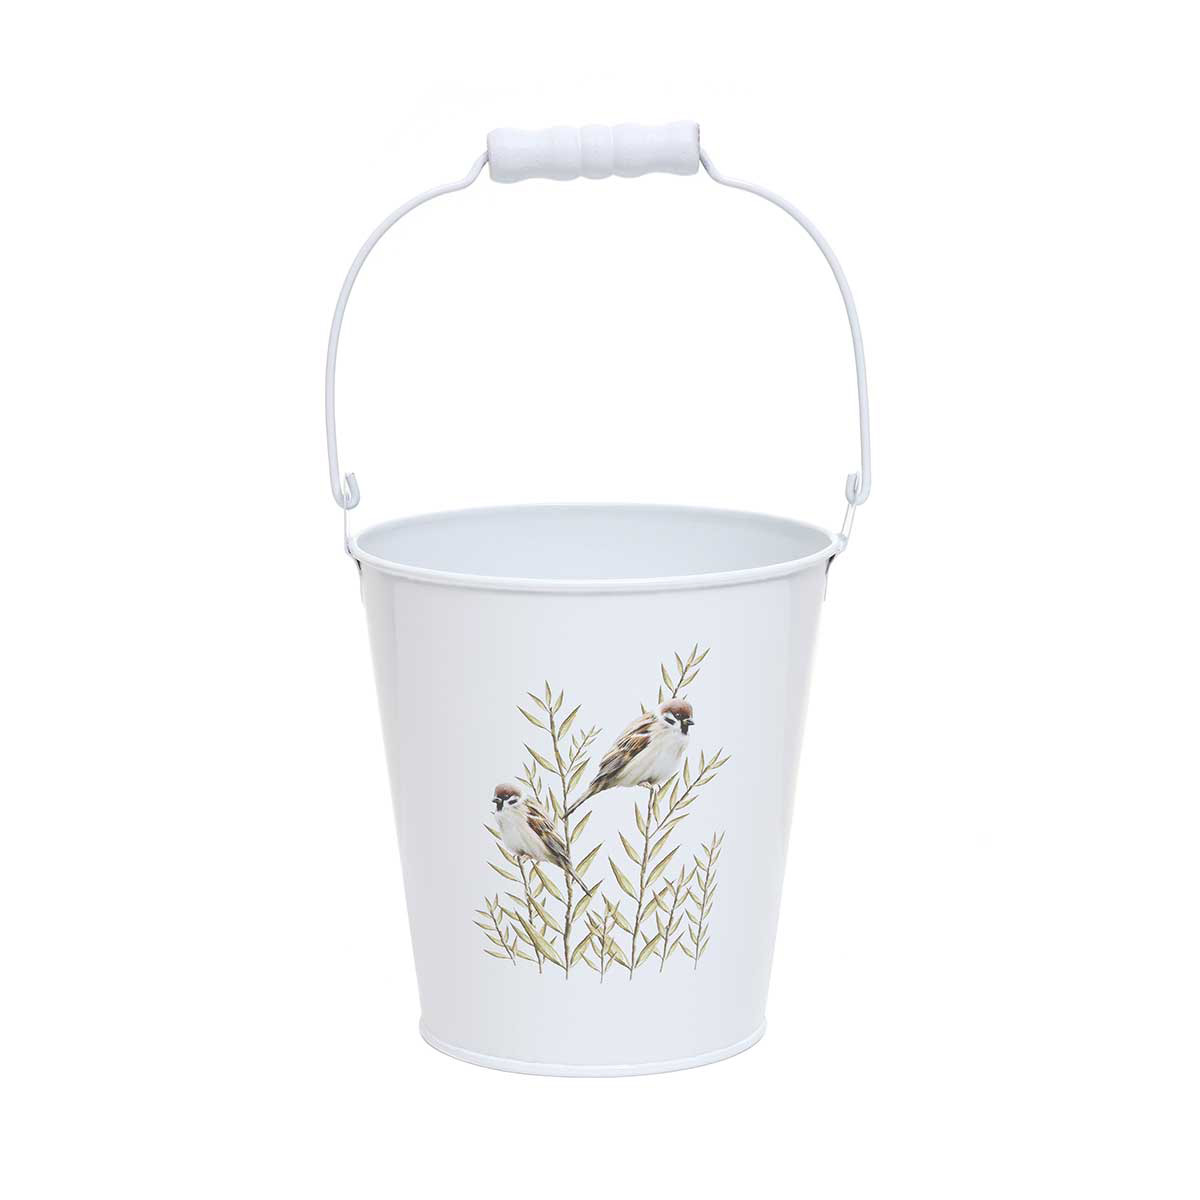 BIRDS ON TWIG METAL BUCKET WHITE WITH HANDLE SMALL 6"X6.5"